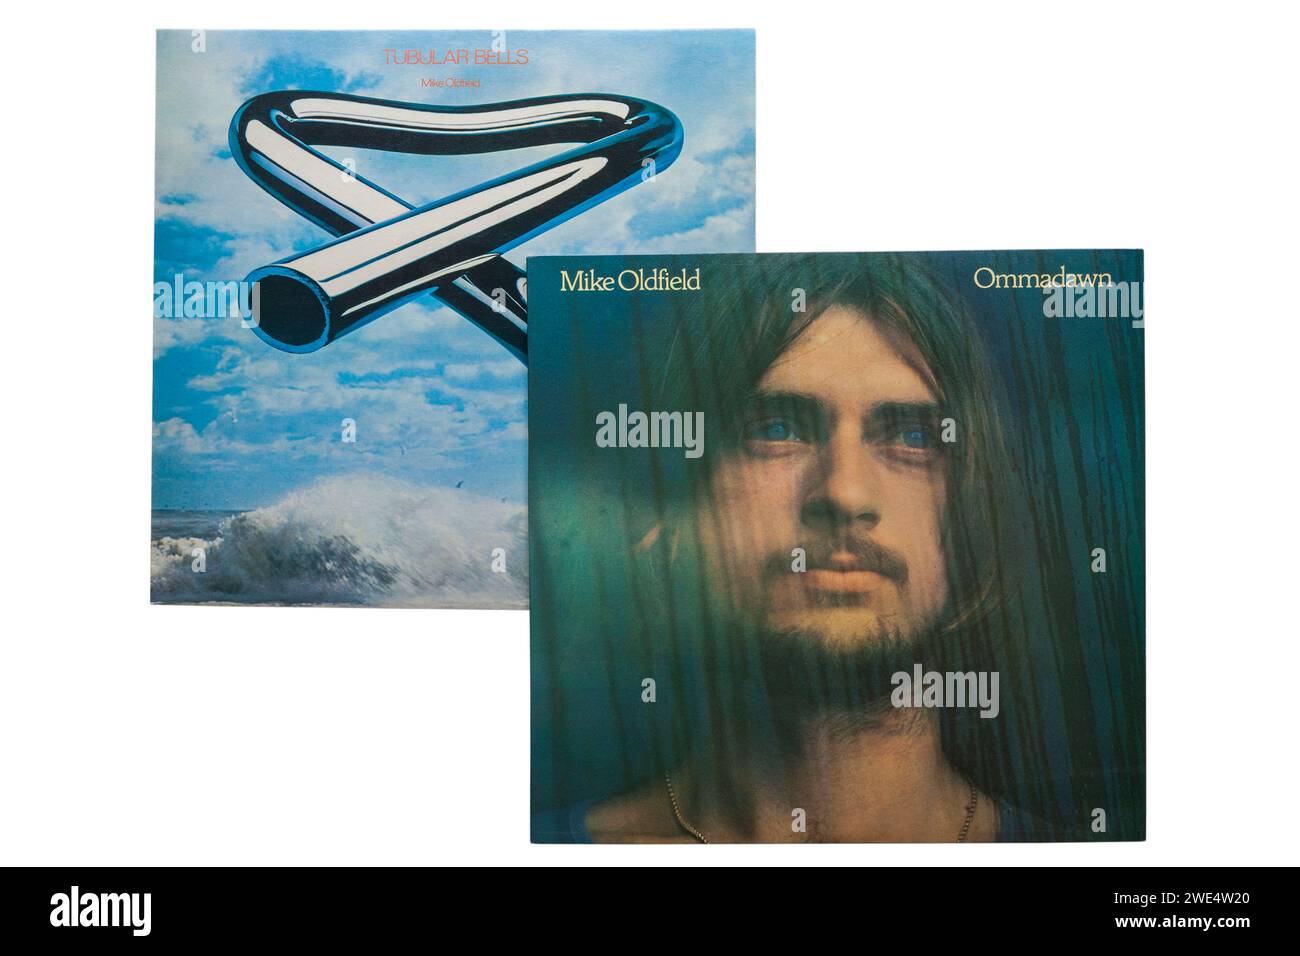 Mike Oldfield Ommadawn vinyl record album LP cover 1975 & Tubular Bells 1973 vinyl record album LP cover isolated on white background Stock Photo